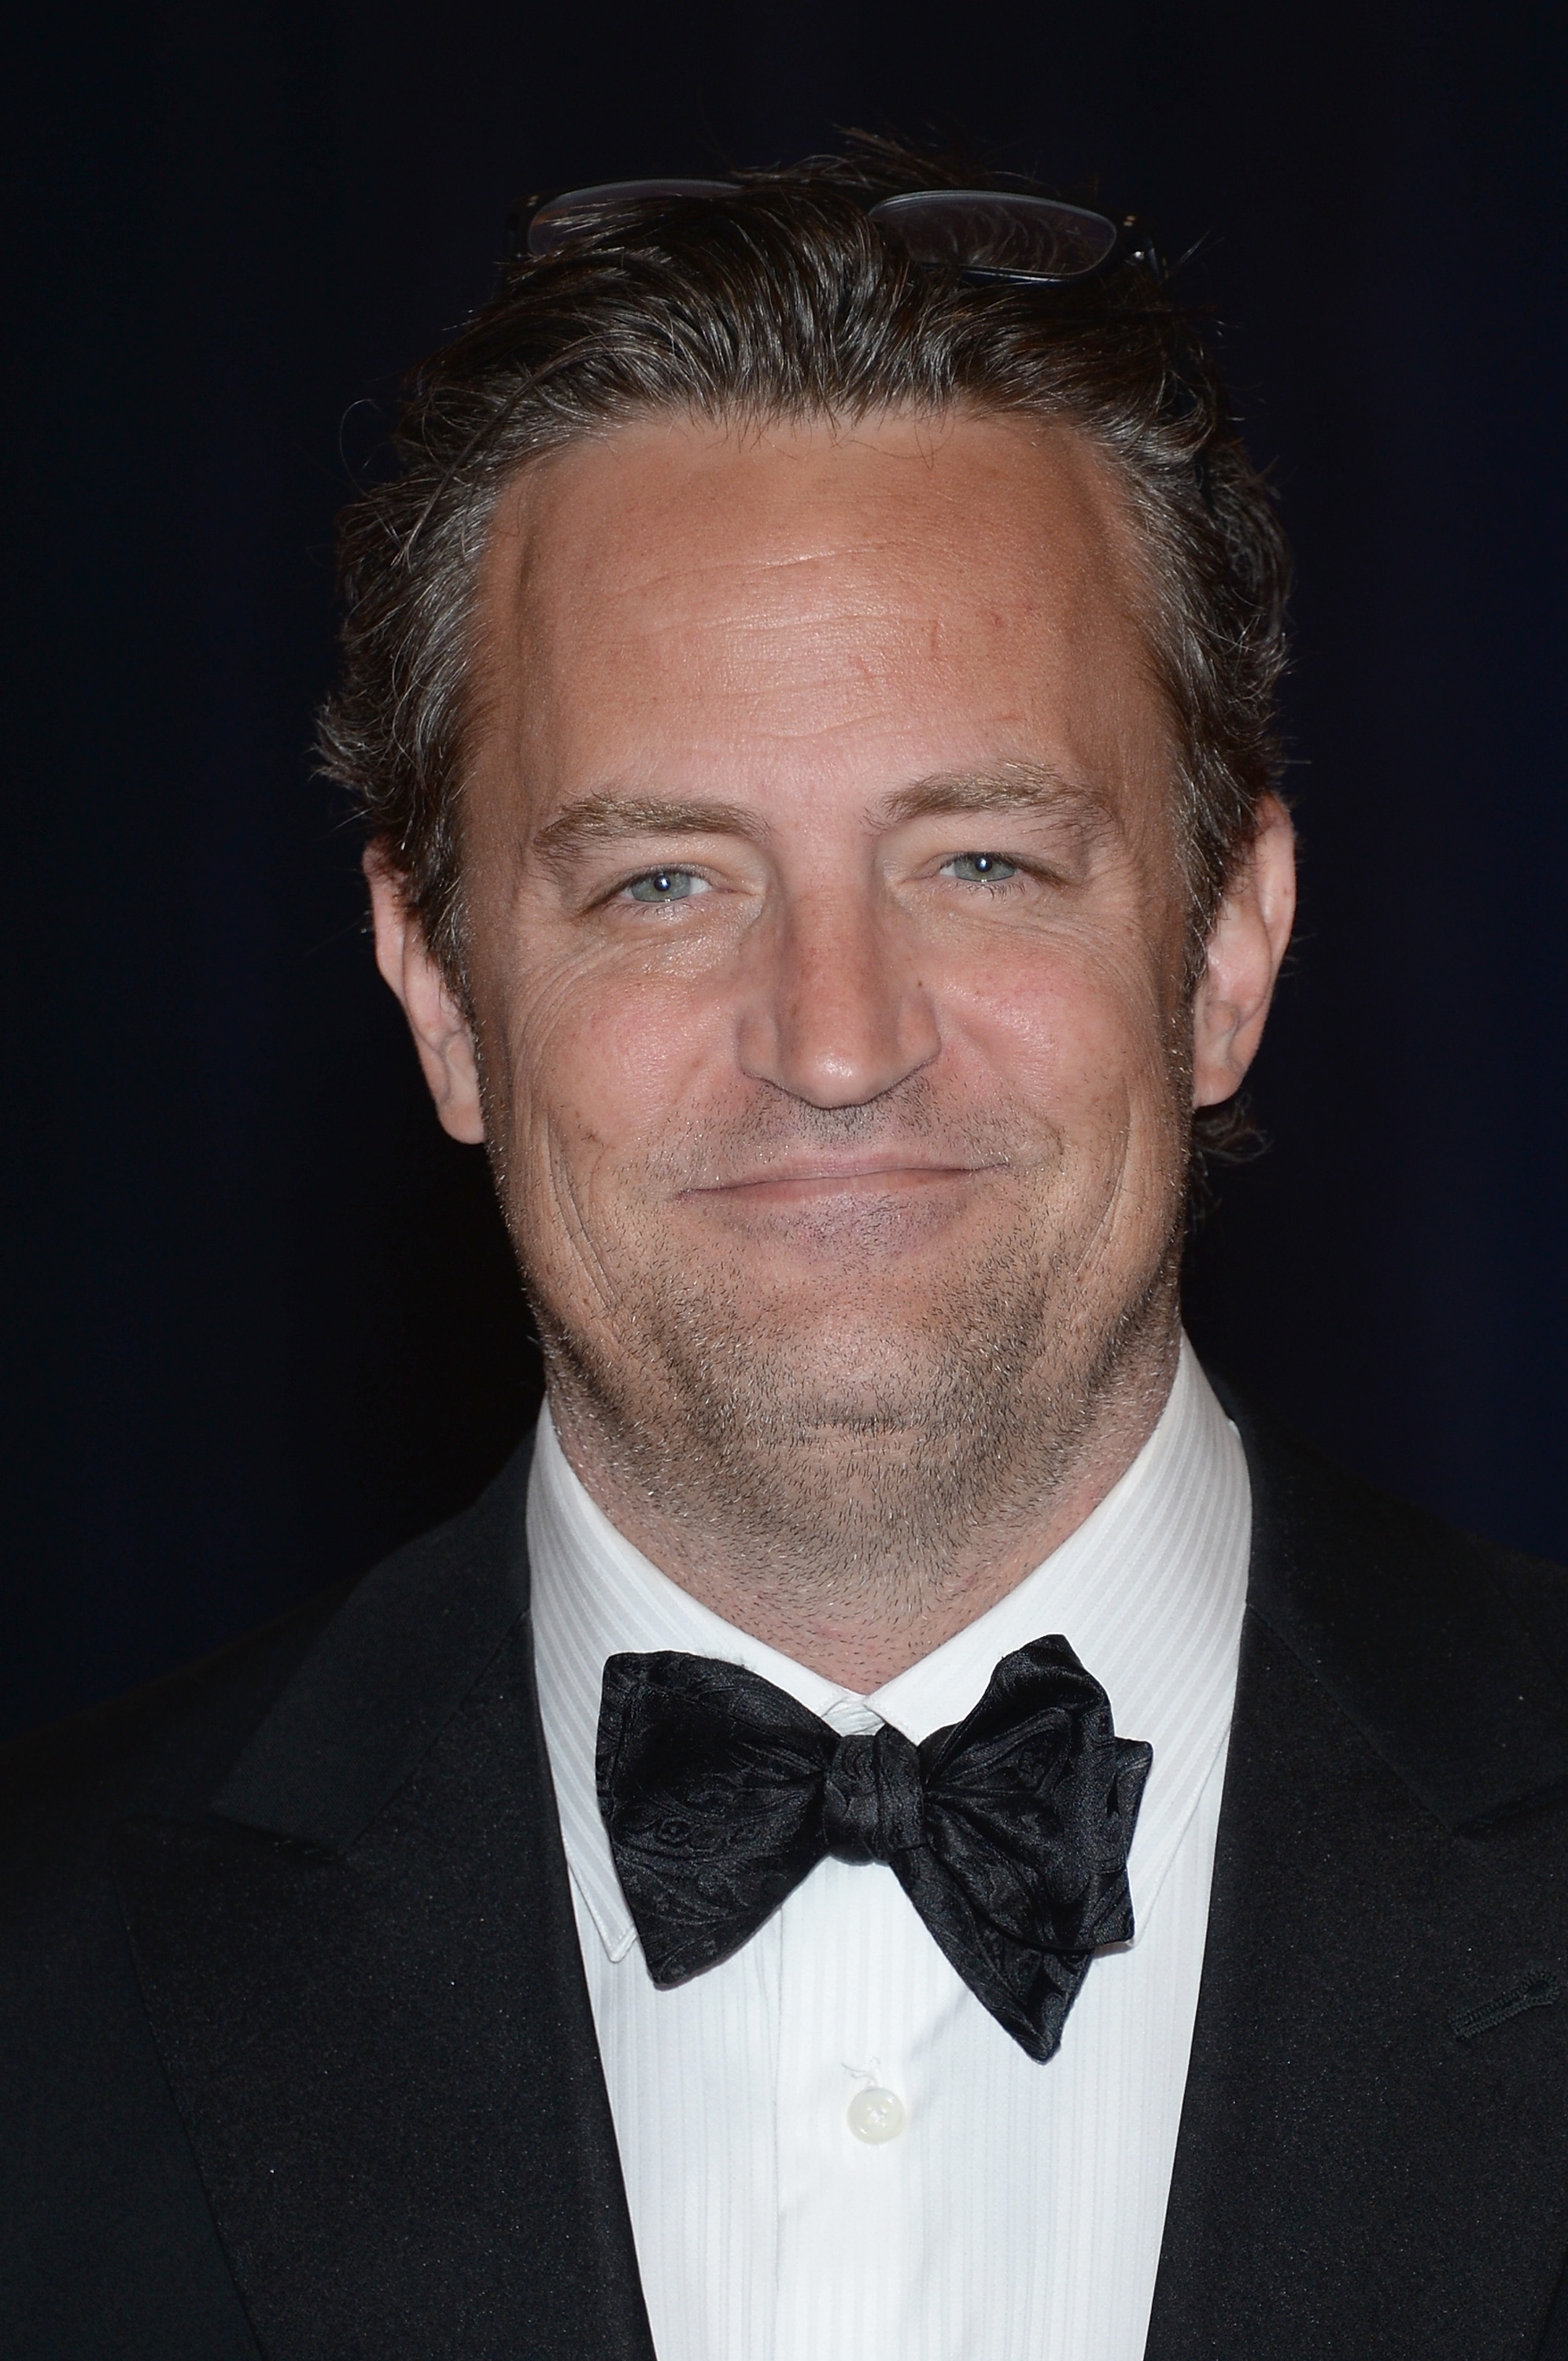 Matthew Perry during the White House Correspondents' Association dinner on April 27, 2013 in Washington, D.C. | Source: Getty Images